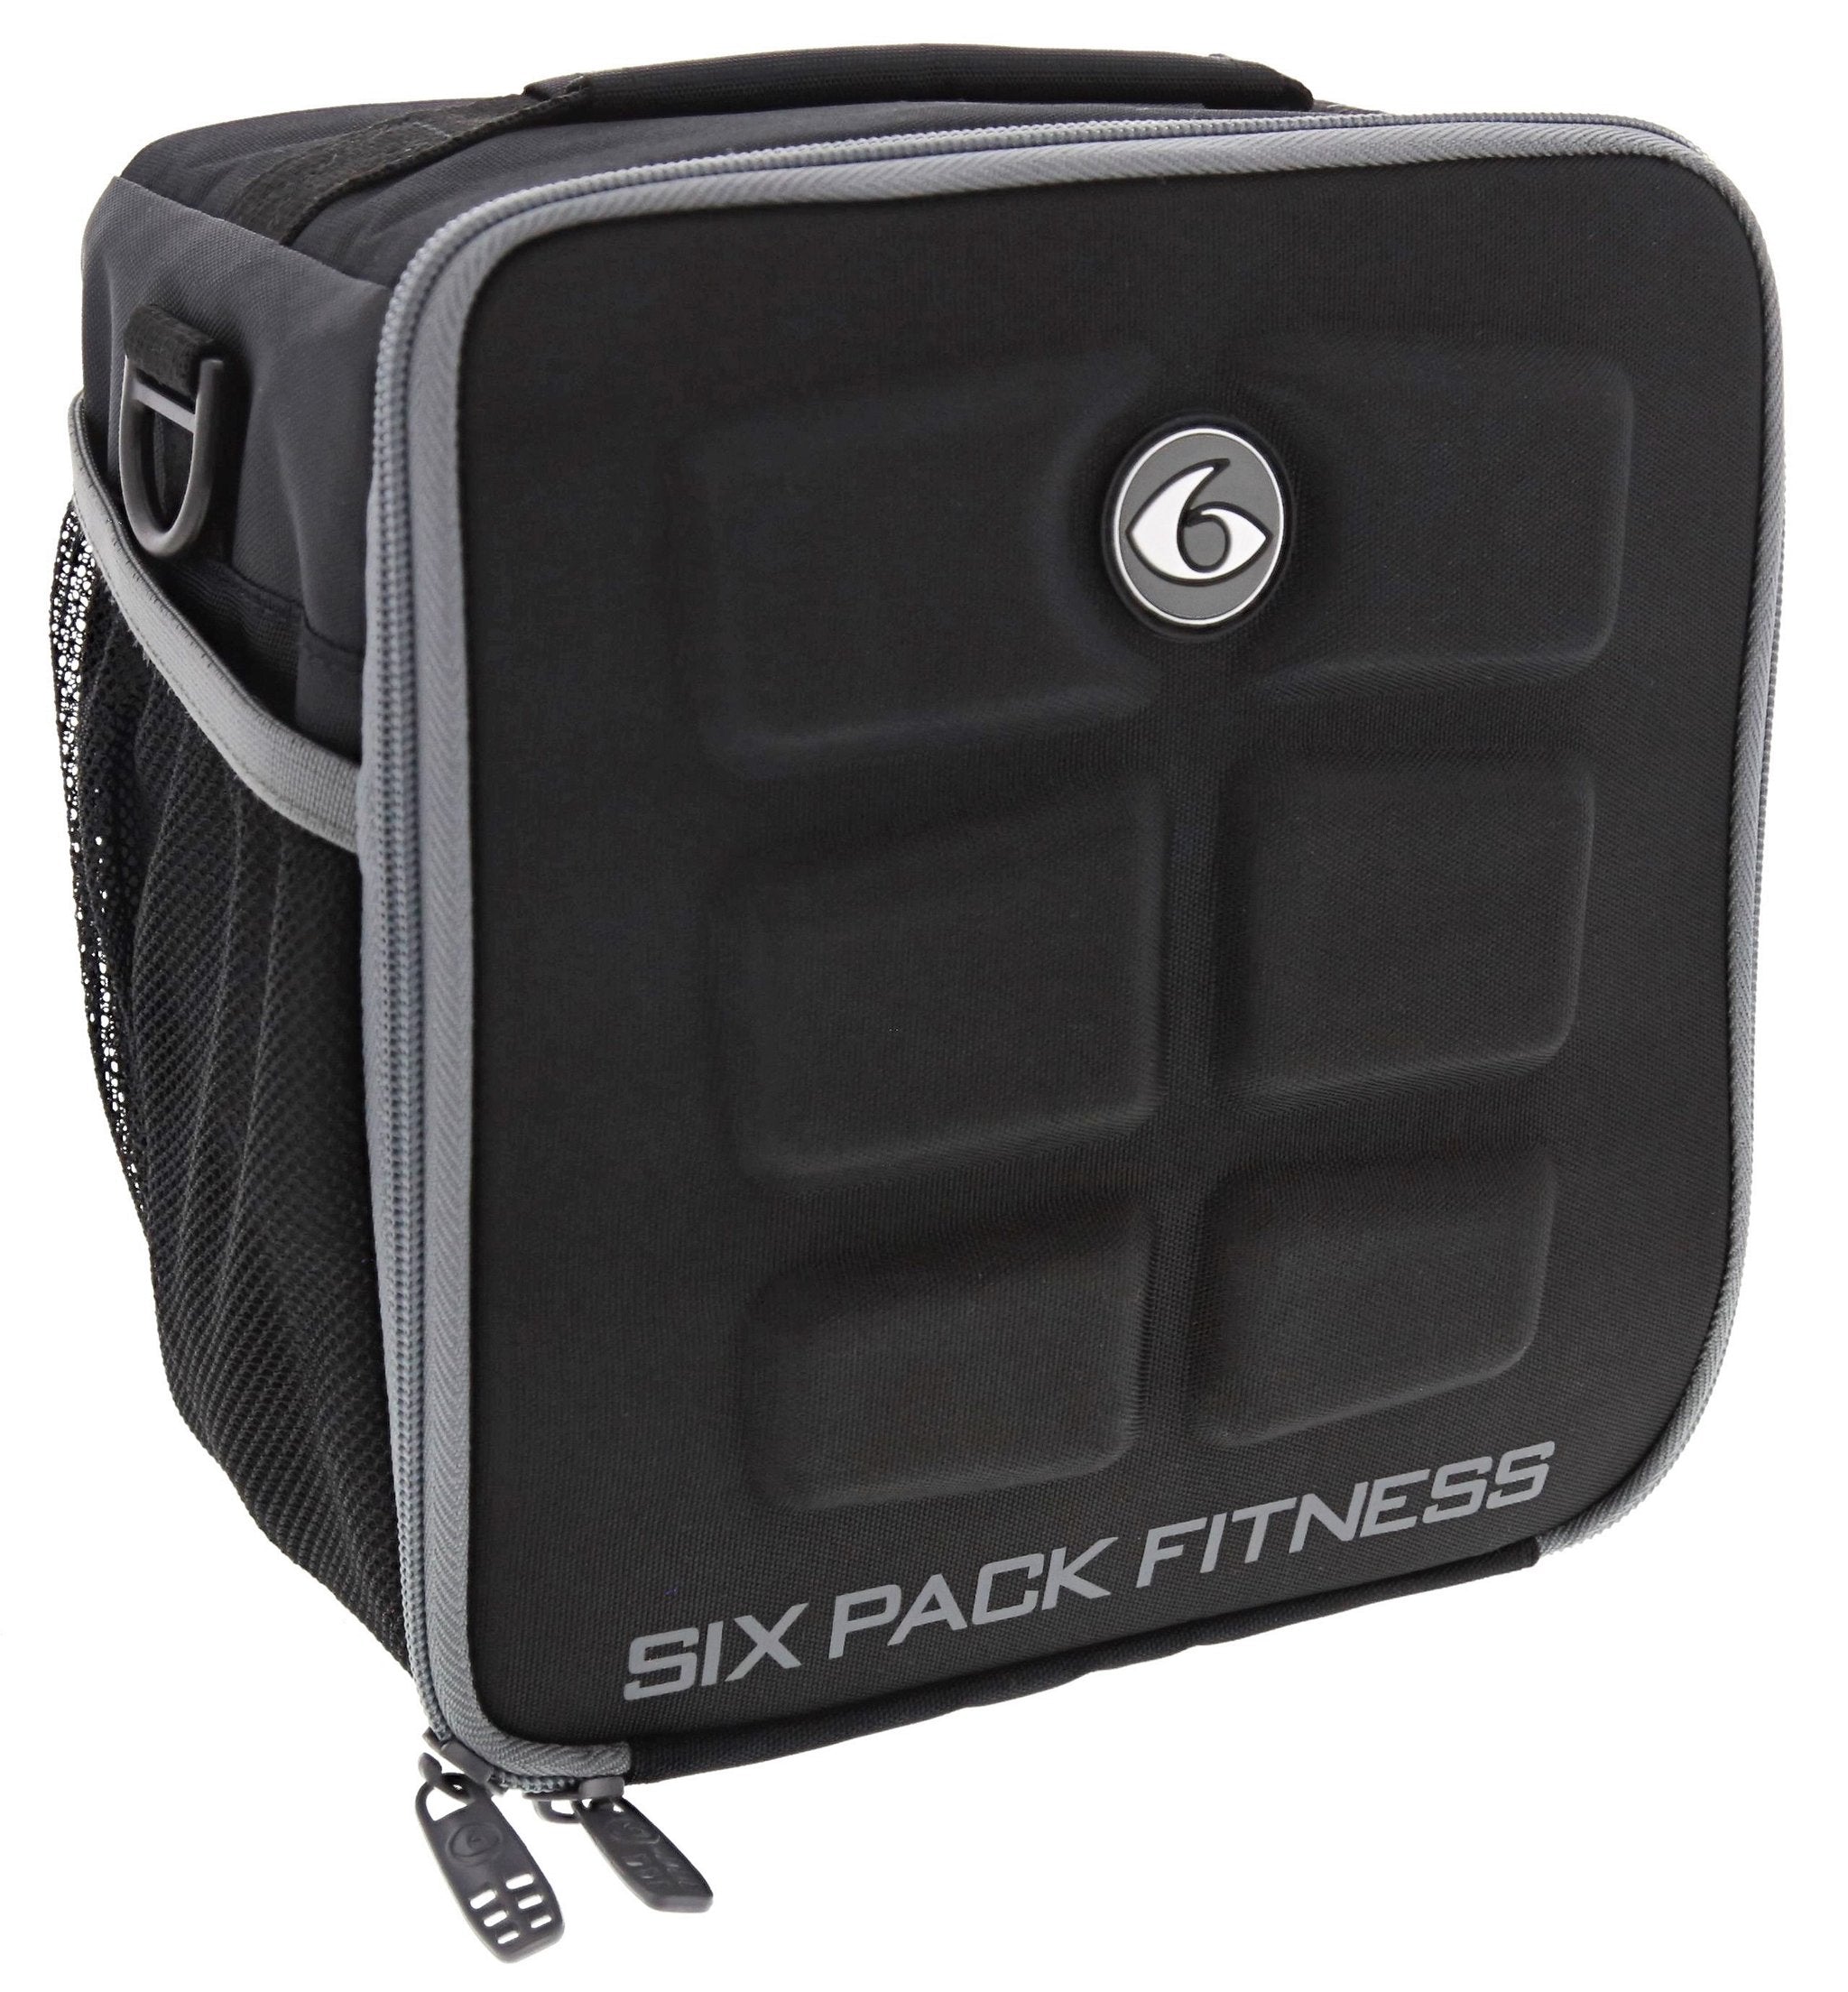 6 Pack Fitness - Stack3d